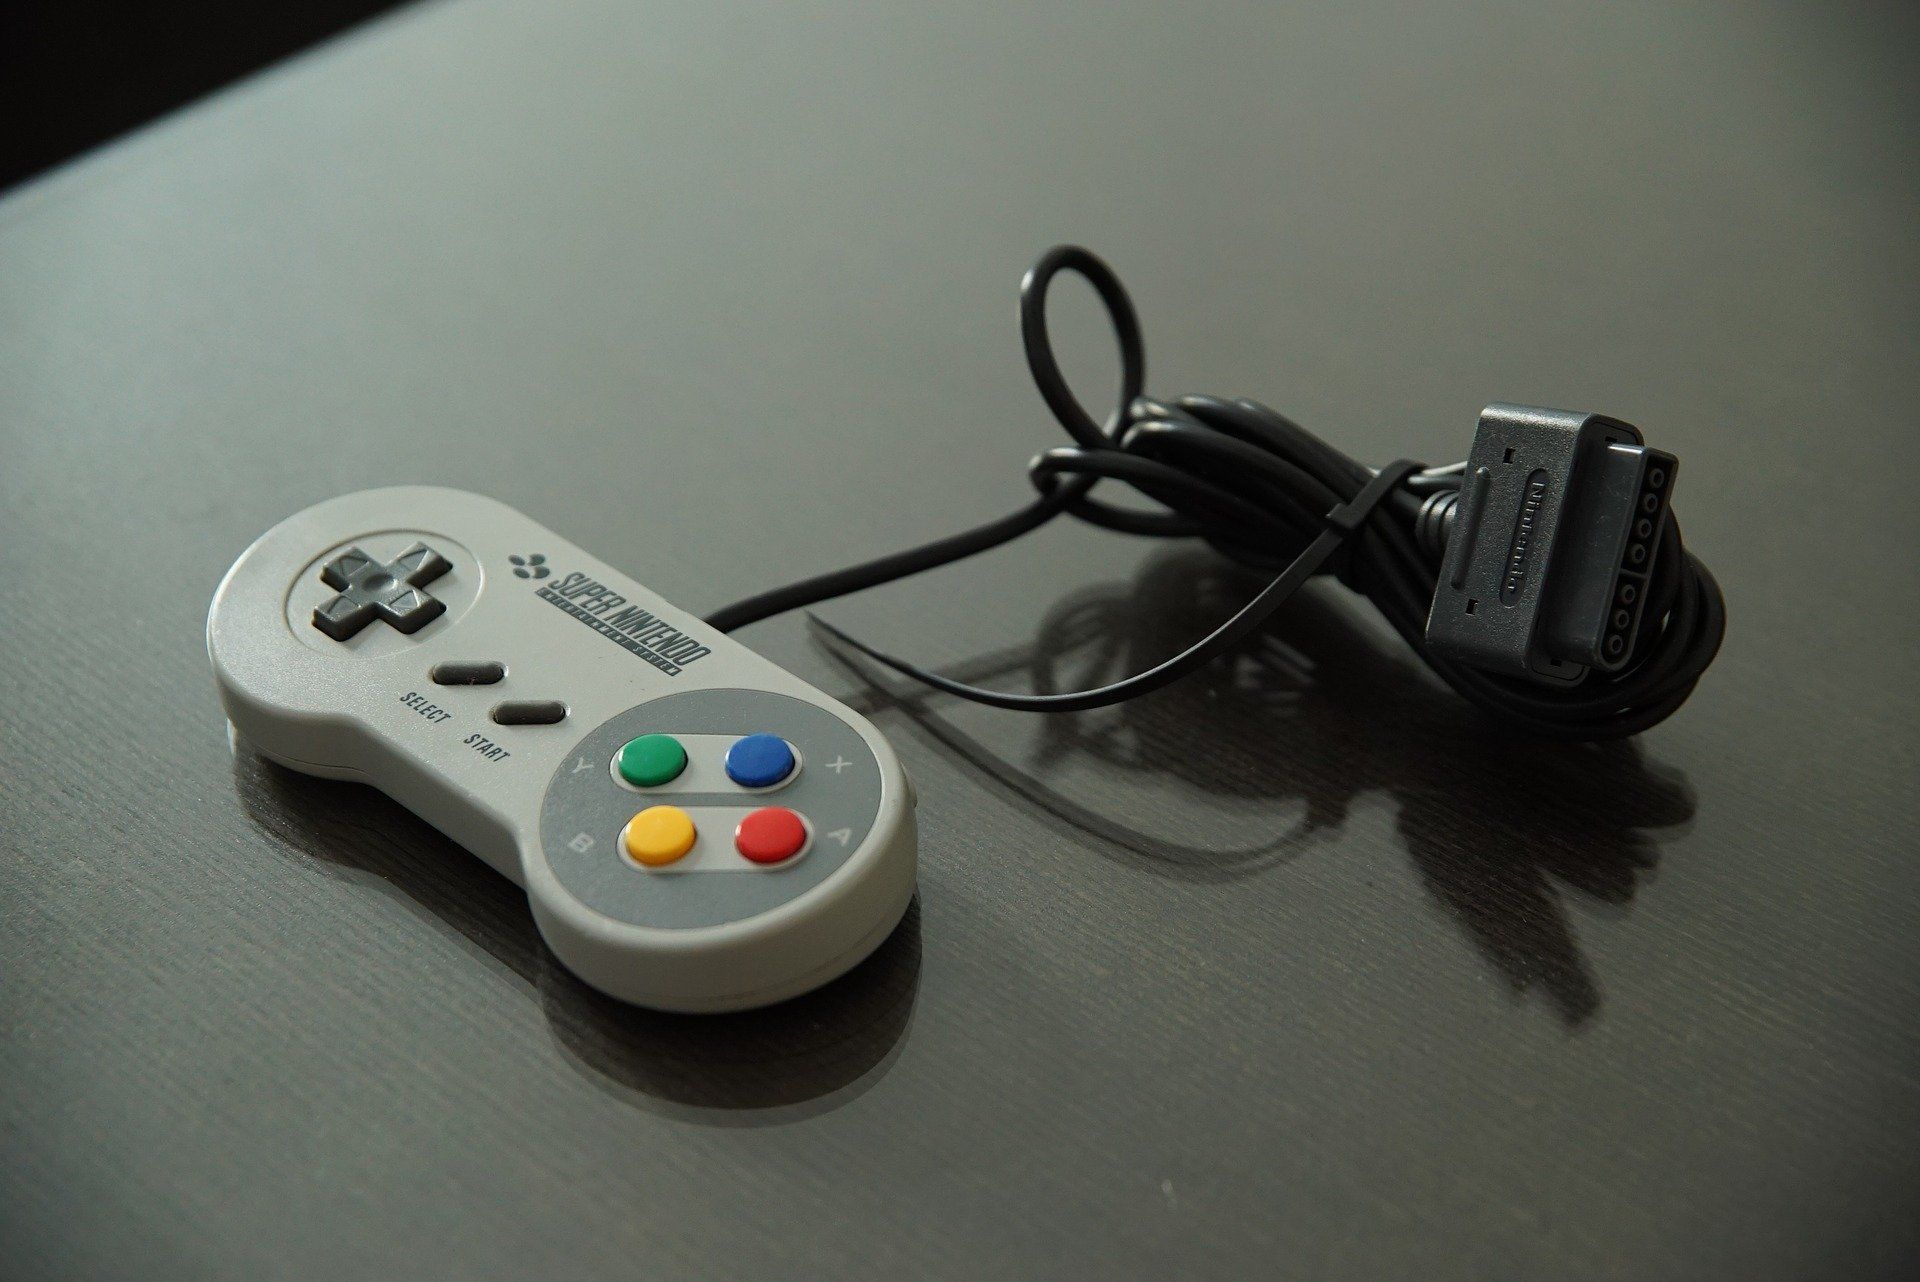 SNES Controller on Table